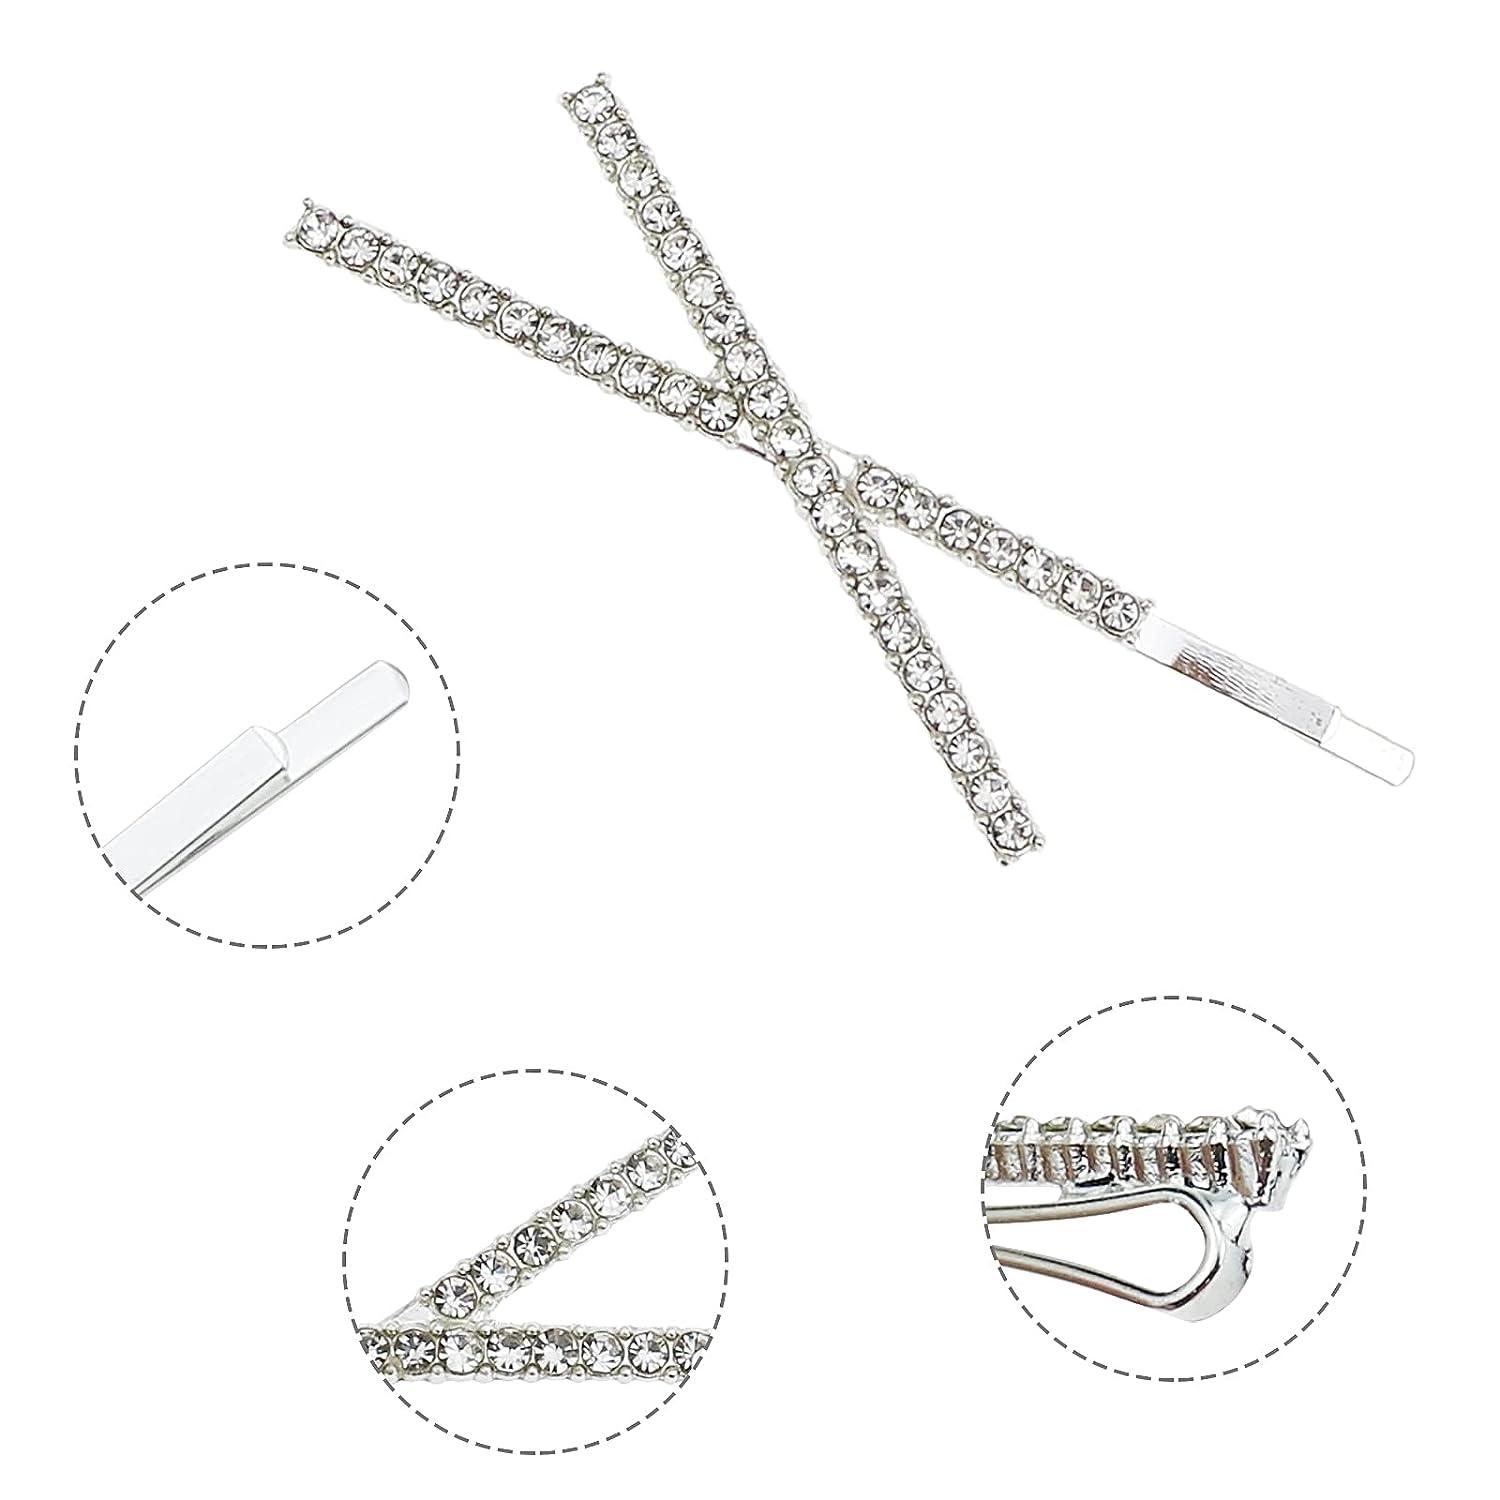 Glam'r Gear Bobby Buddy Magnetic Hair Pin Tray White